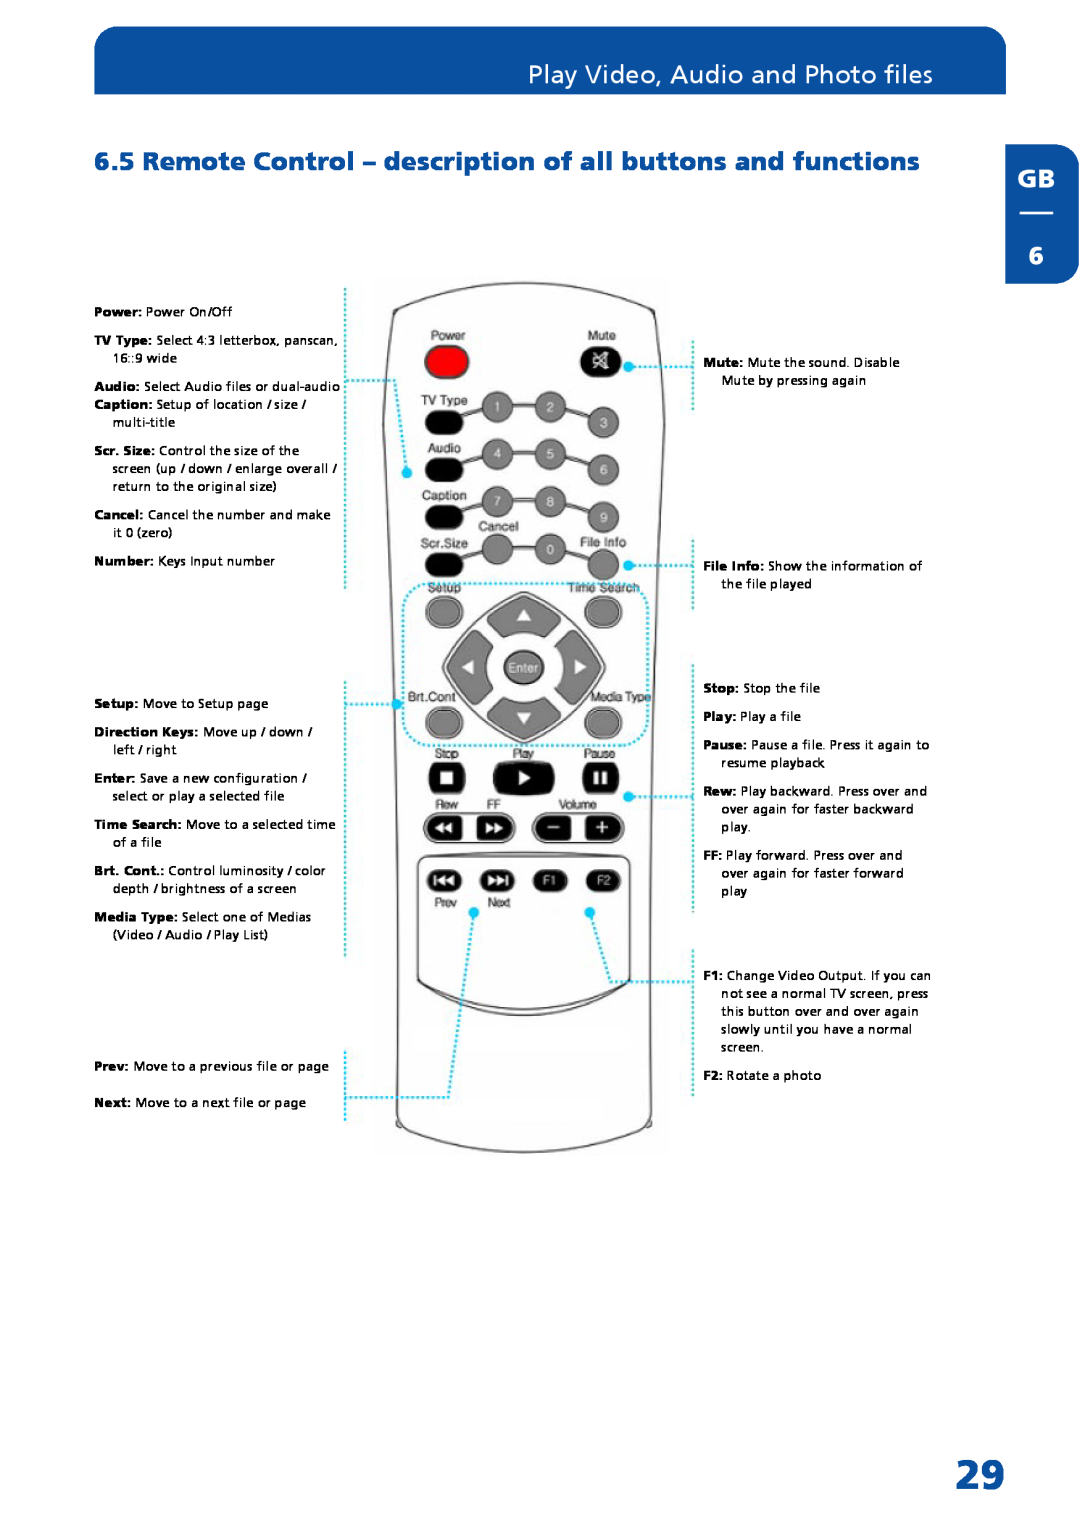 Freecom Technologies Multimedia Player manual Remote Control - description of all buttons and functions 